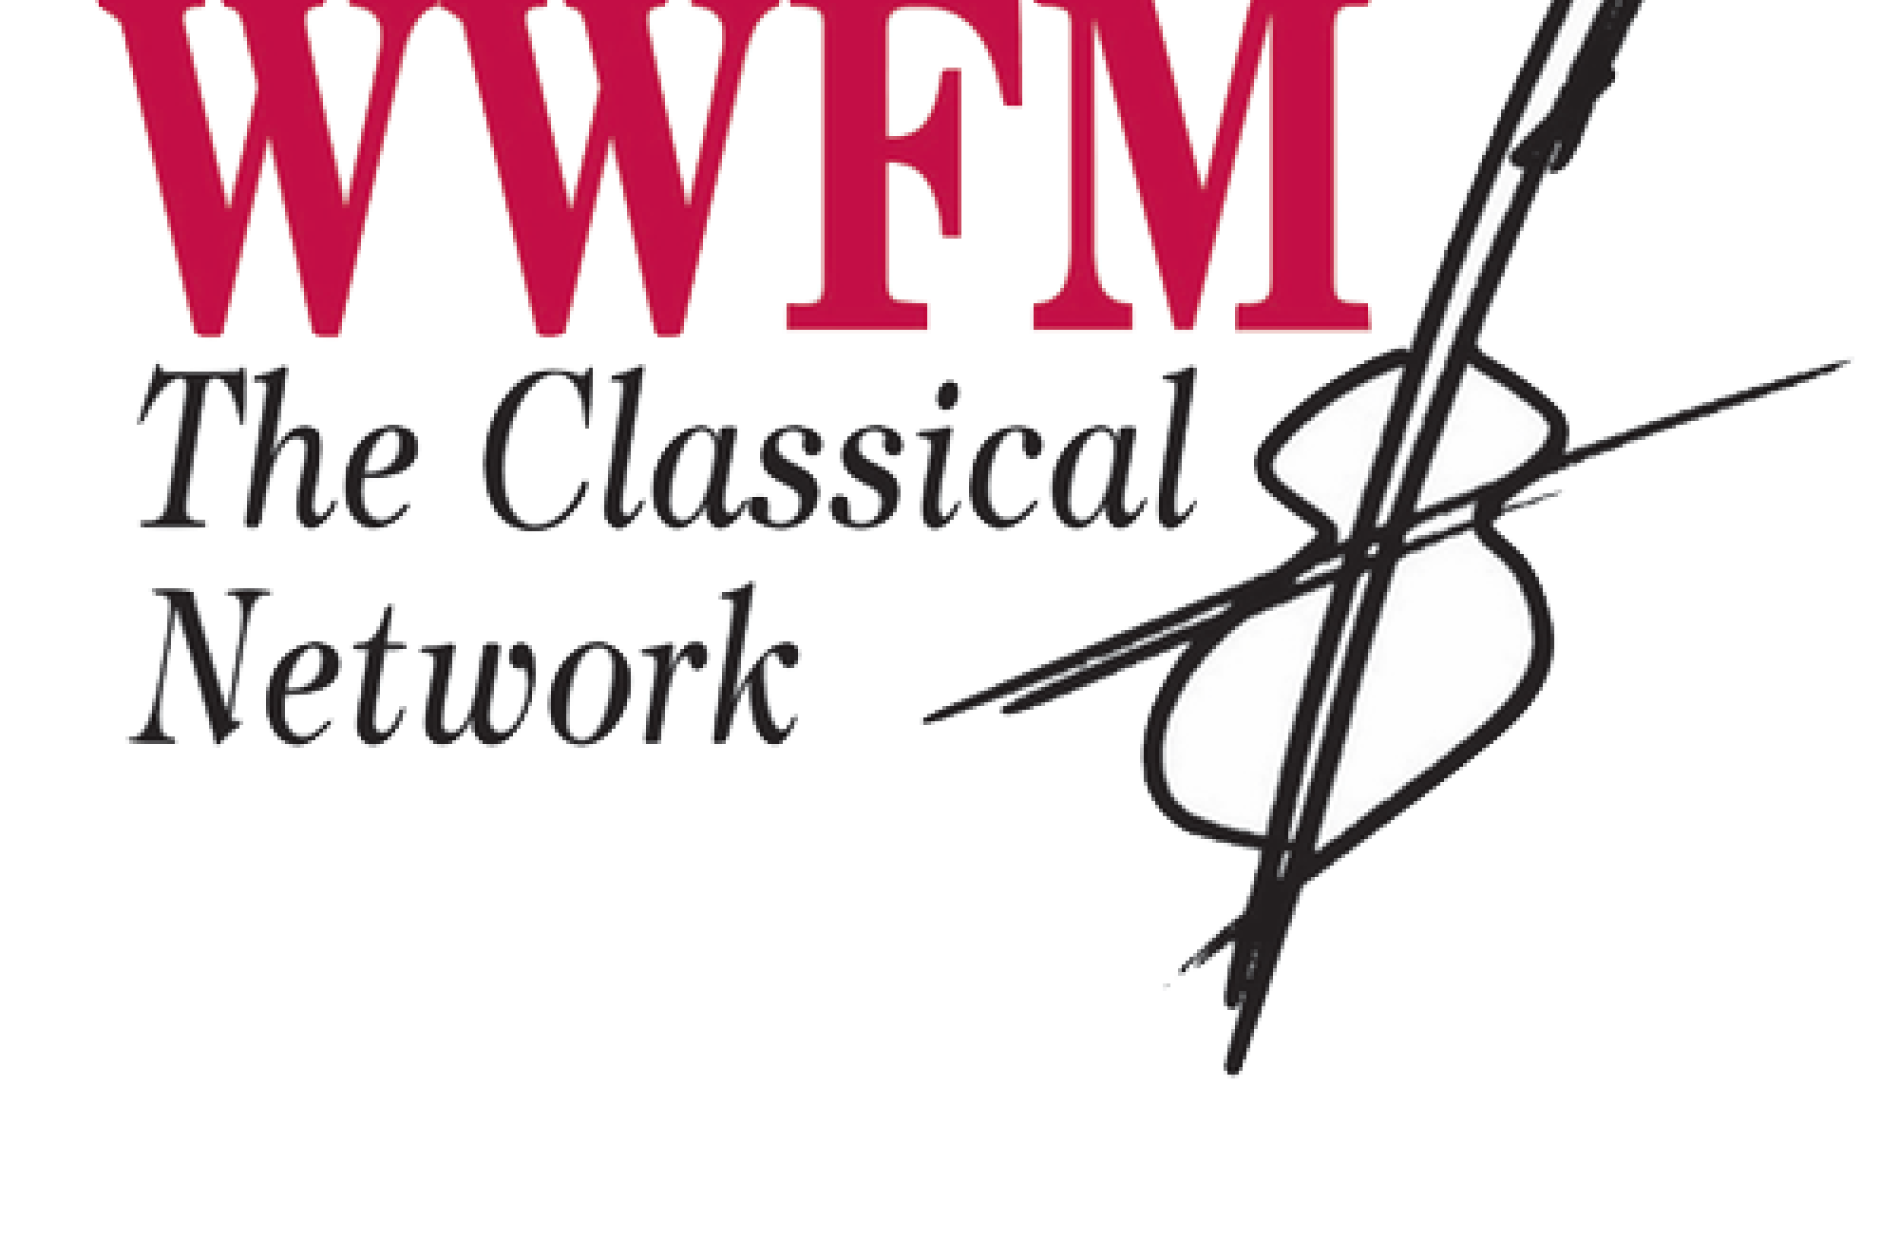 WWFM - The Classical Network